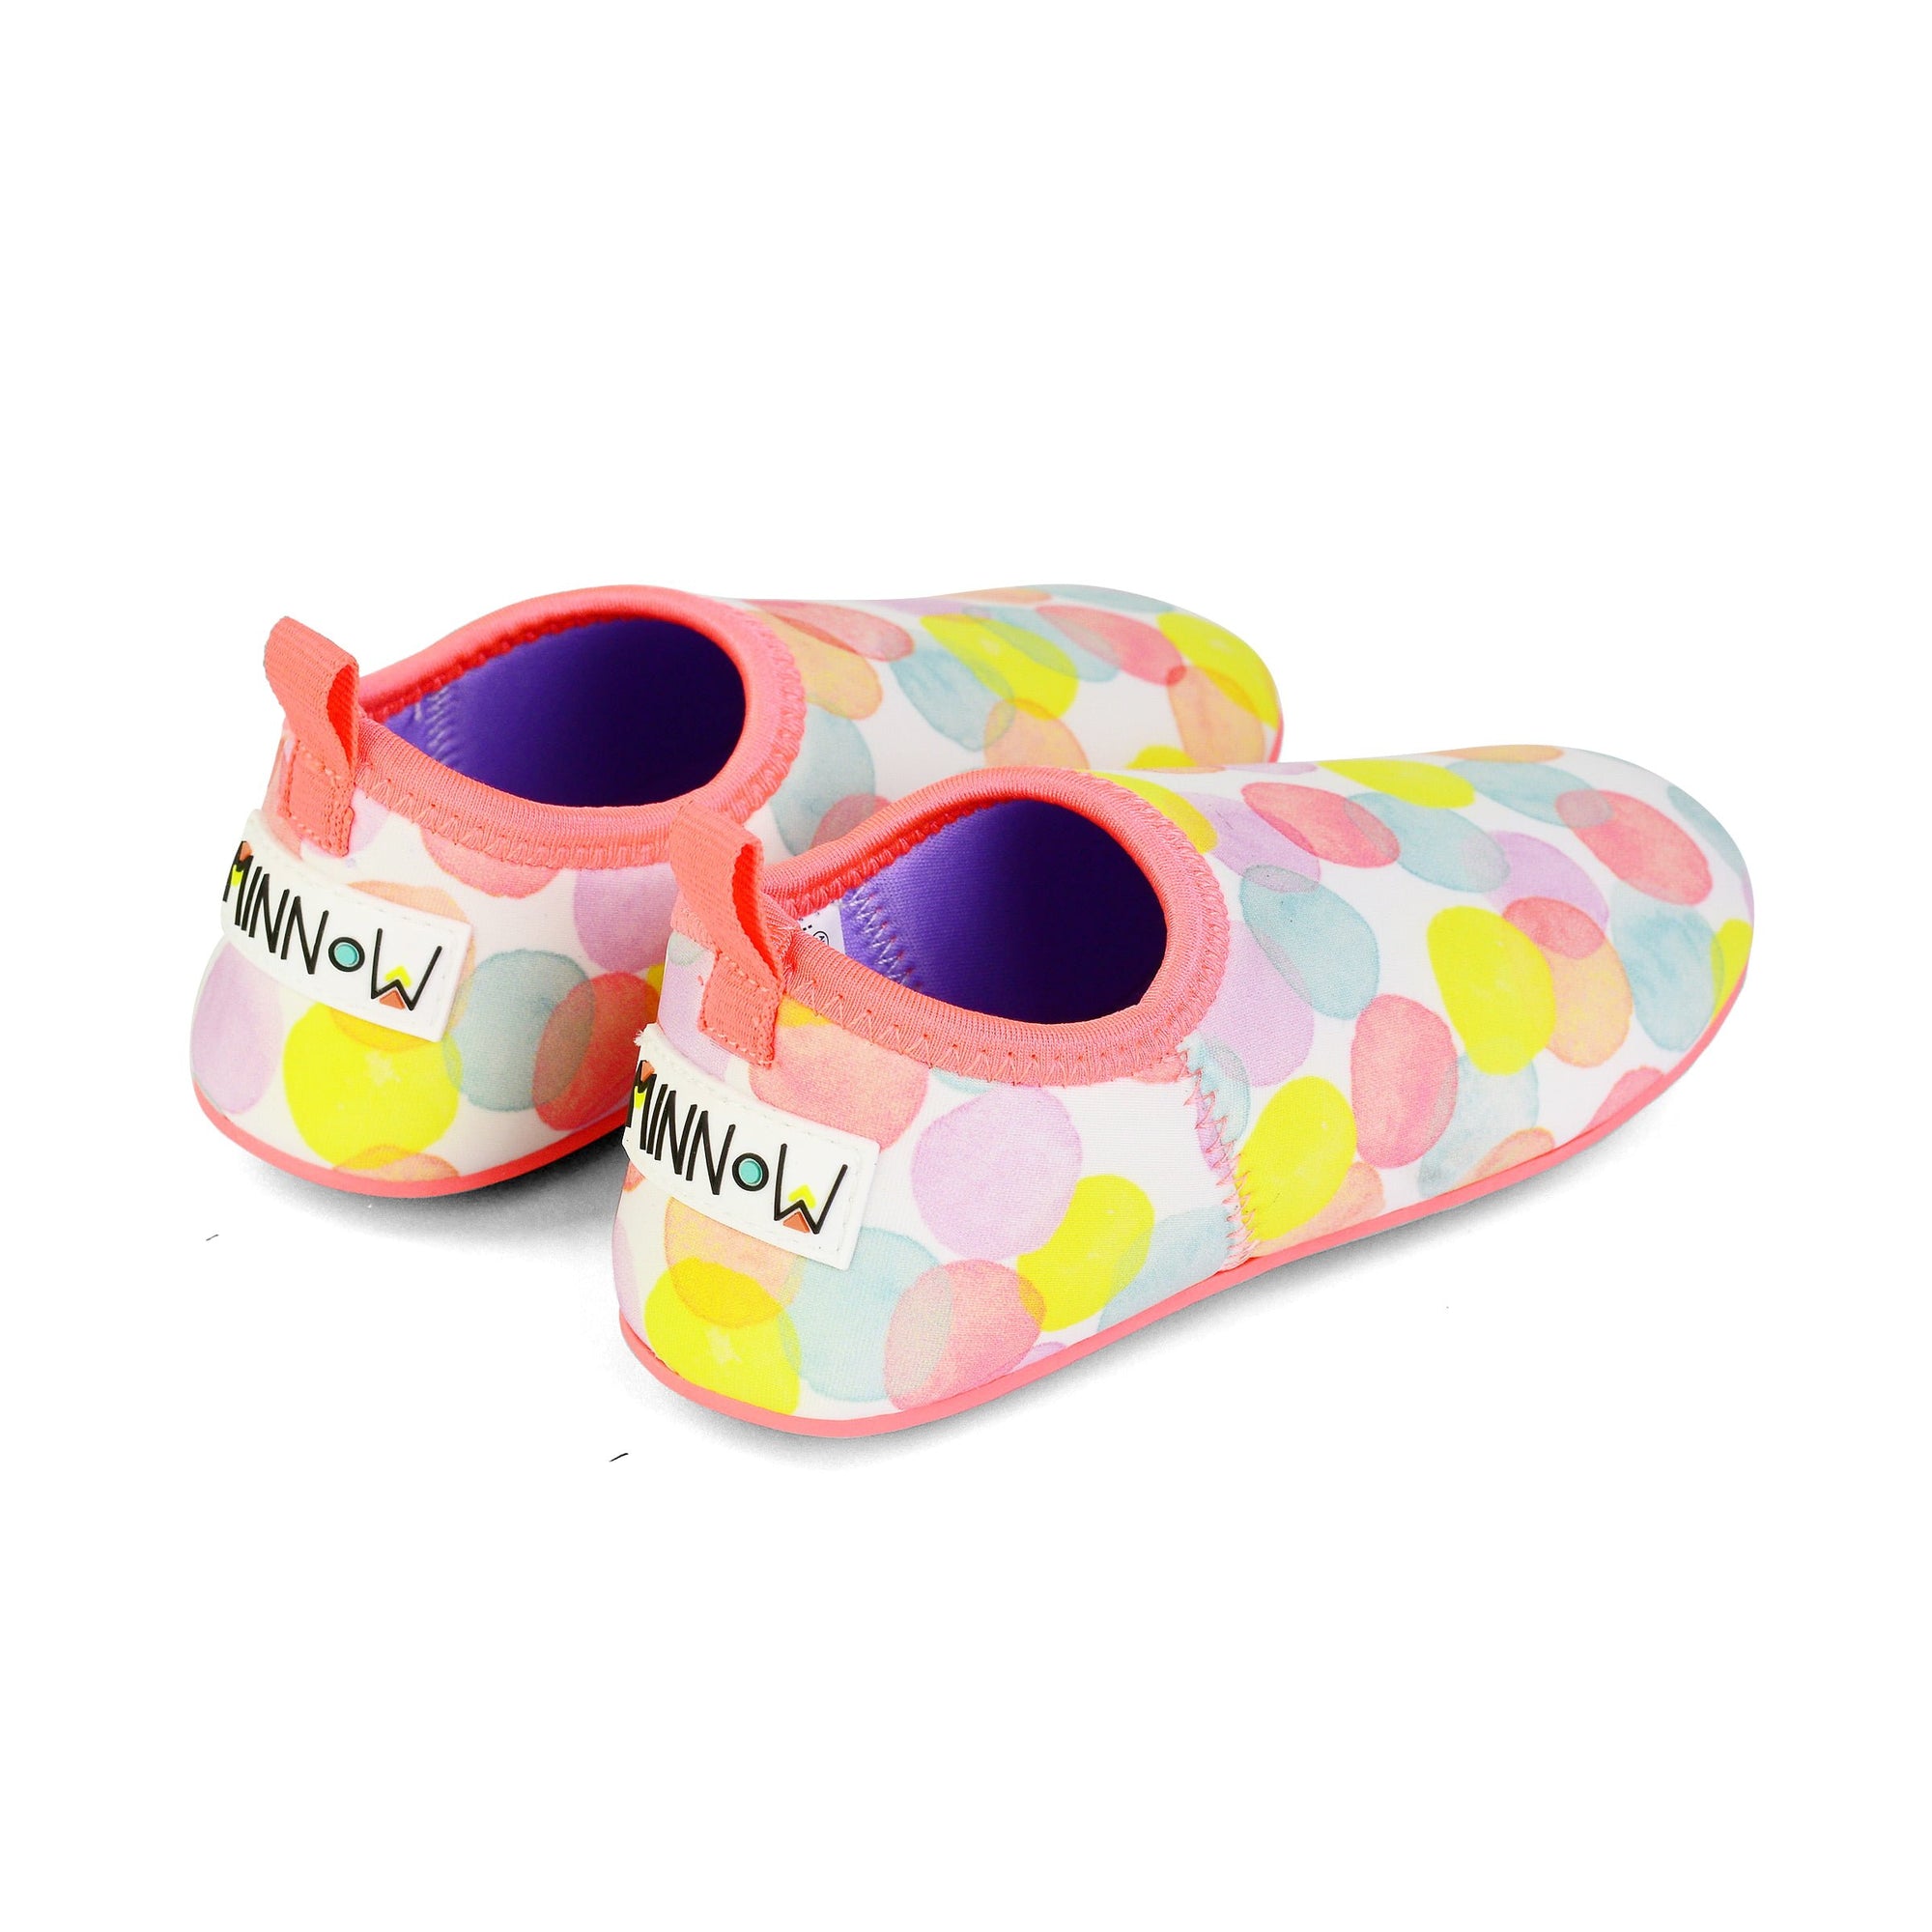 Minnow Flex Sole Swimmable Shoes - Dotty in